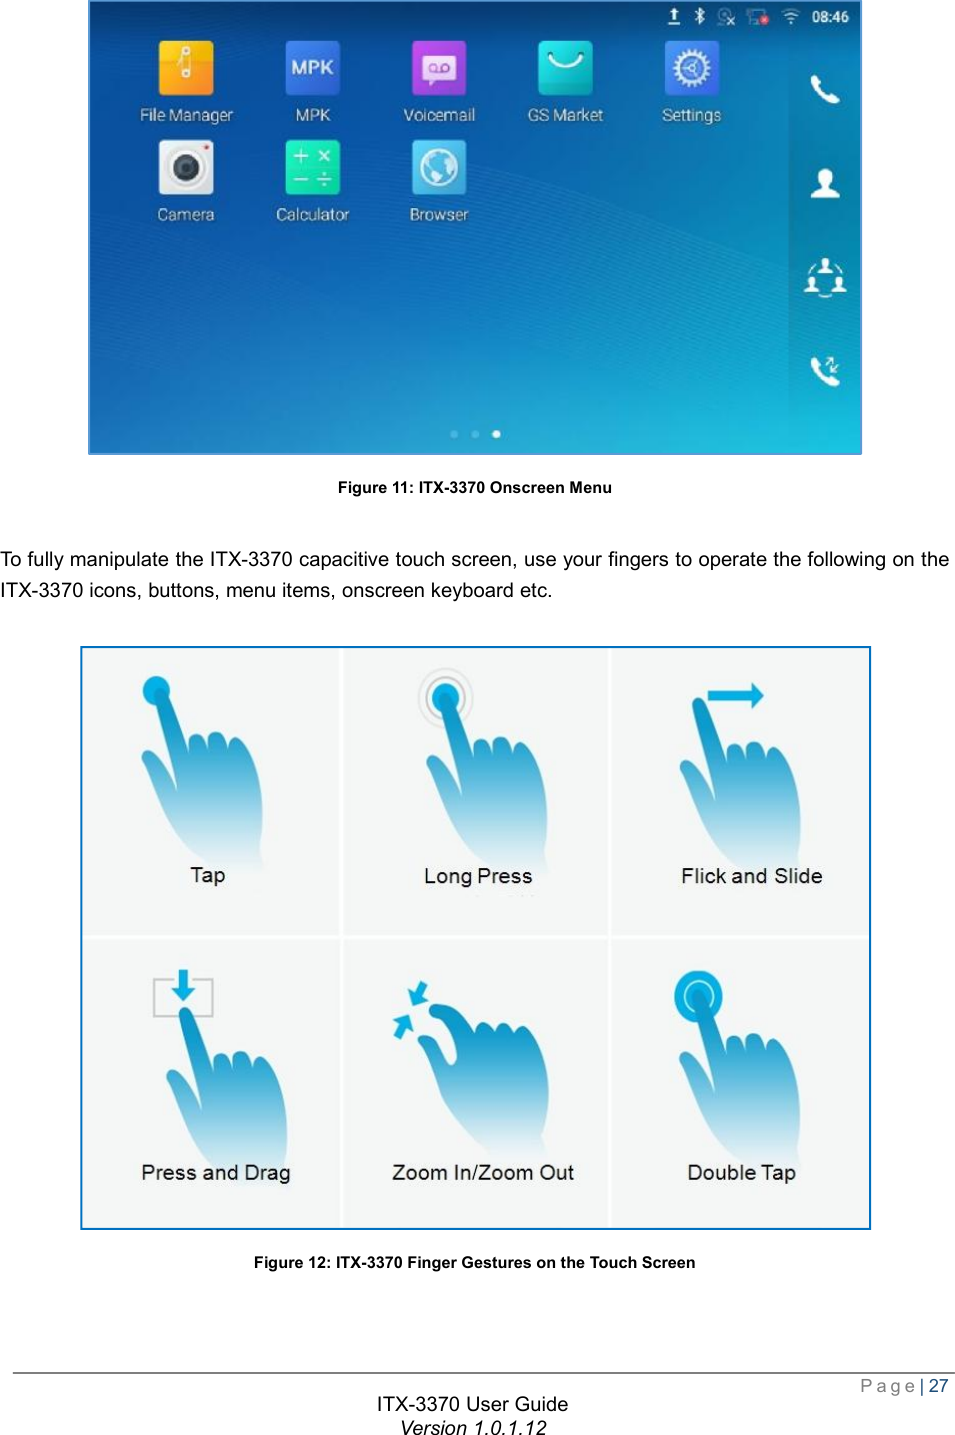  Page| 27  ITX-3370 User Guide Version 1.0.1.12   Figure 11: ITX-3370 Onscreen Menu  To fully manipulate the ITX-3370 capacitive touch screen, use your fingers to operate the following on the ITX-3370 icons, buttons, menu items, onscreen keyboard etc.   Figure 12: ITX-3370 Finger Gestures on the Touch Screen   